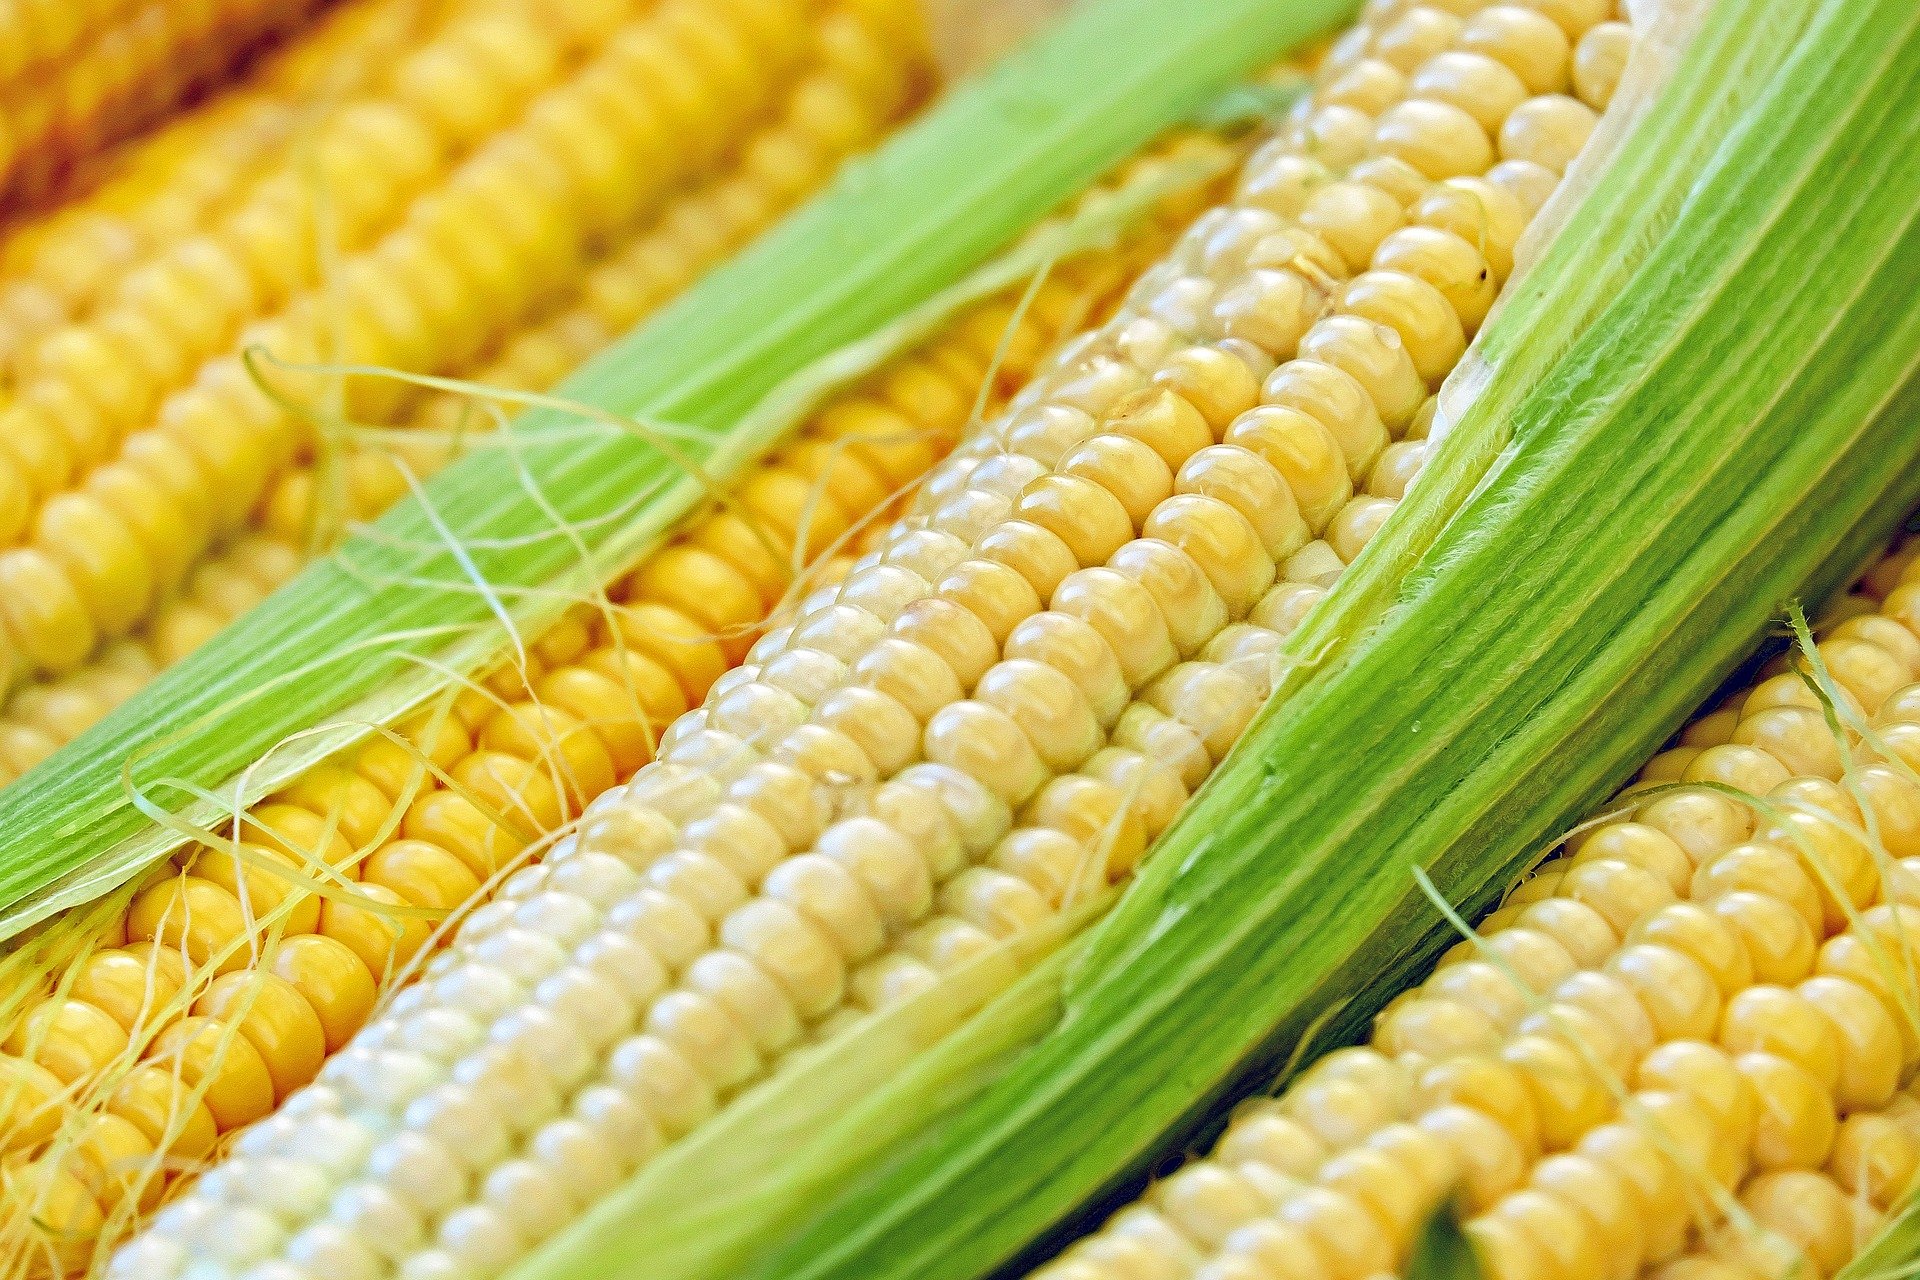 A close-up of corn kernels on cobs.